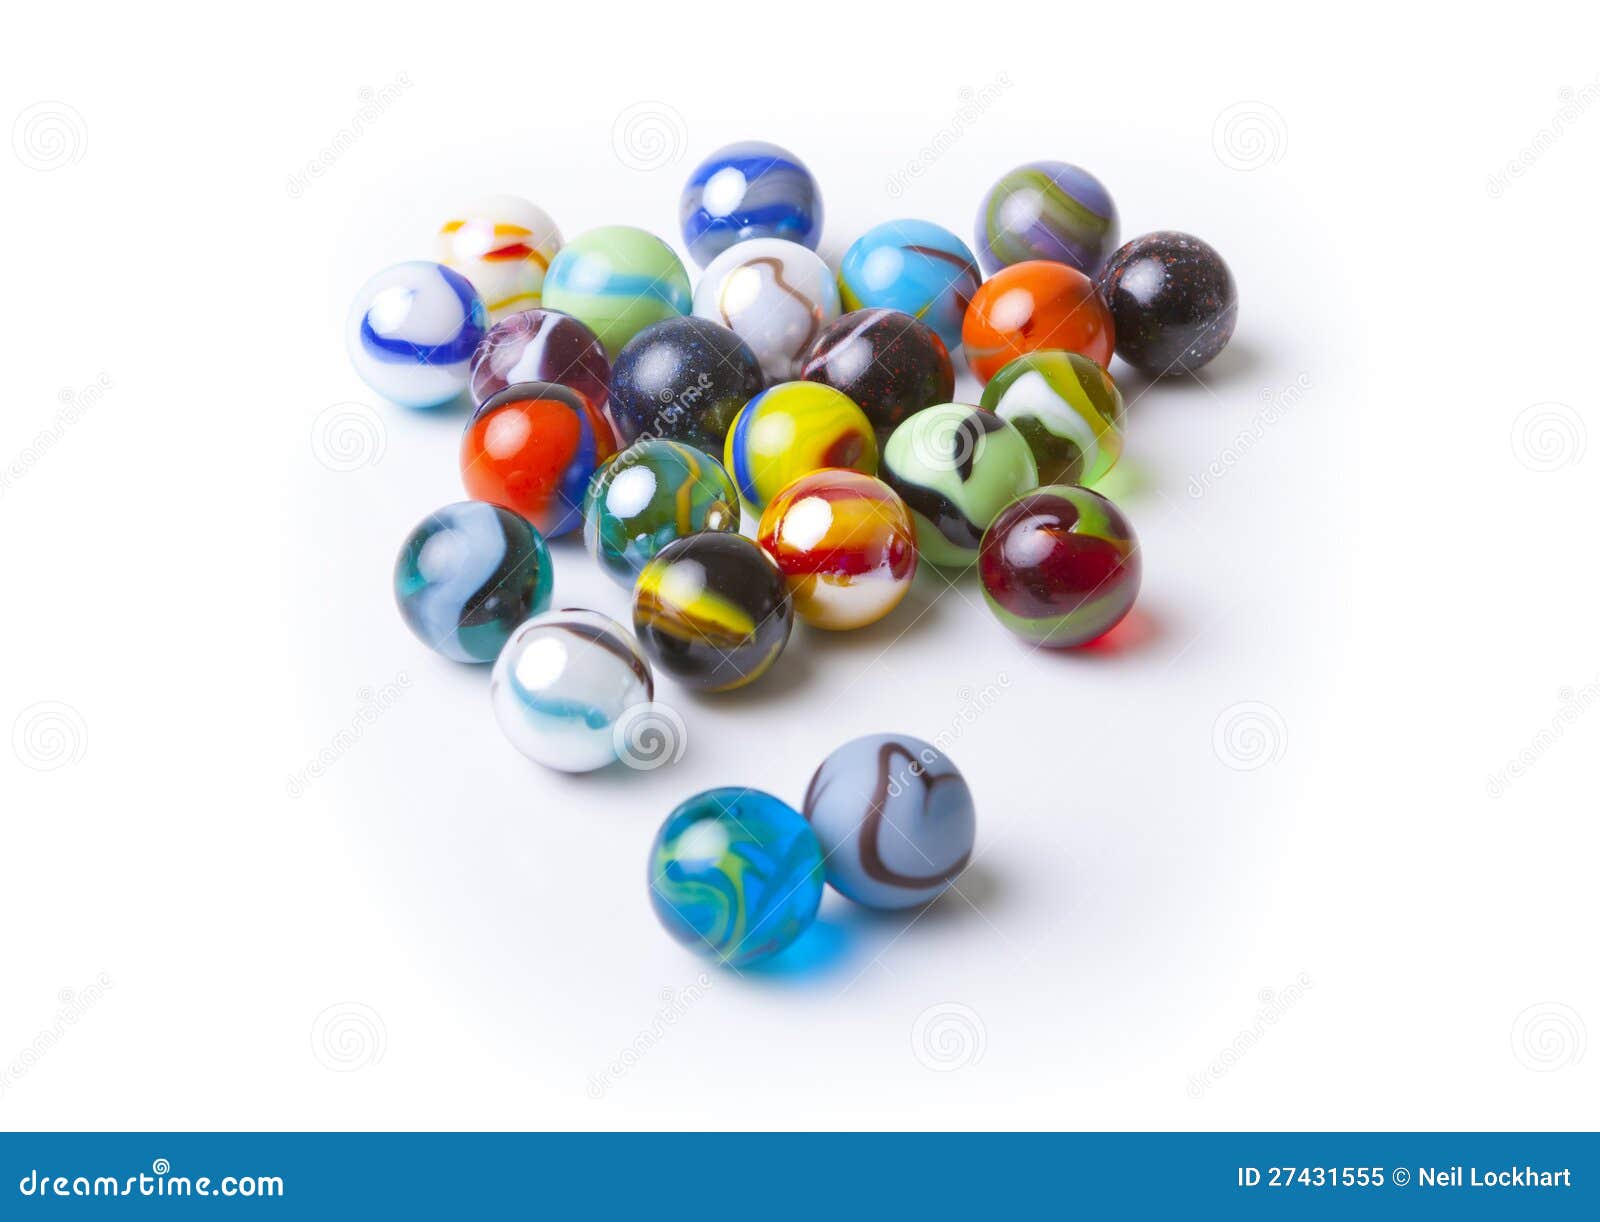 Colorful Marbles Royalty Free Stock Photo - Image: 27431555